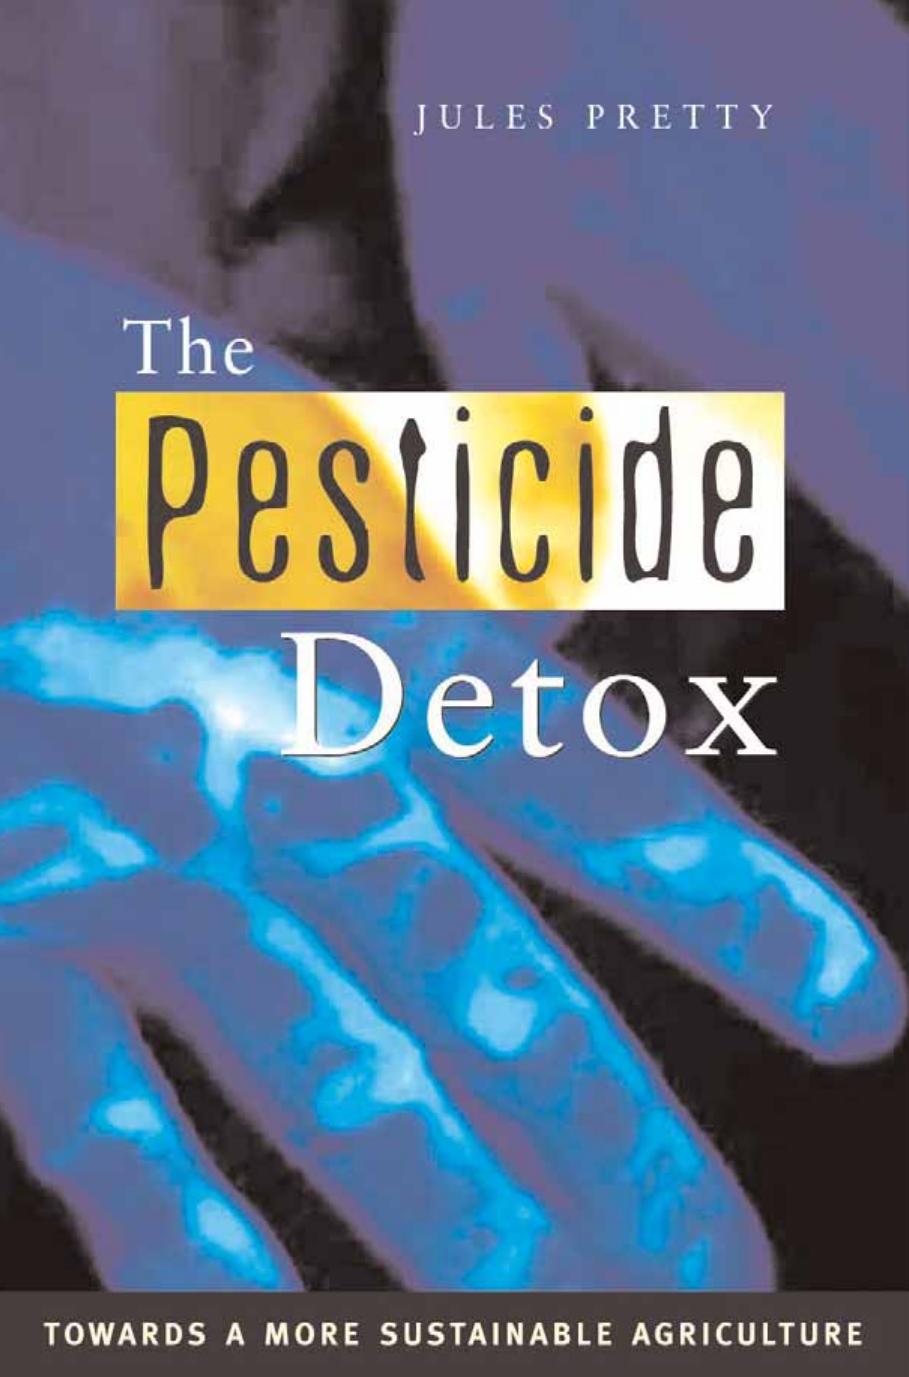 The Pesticide Detox Towards a More Sustainable Agriculture 2005